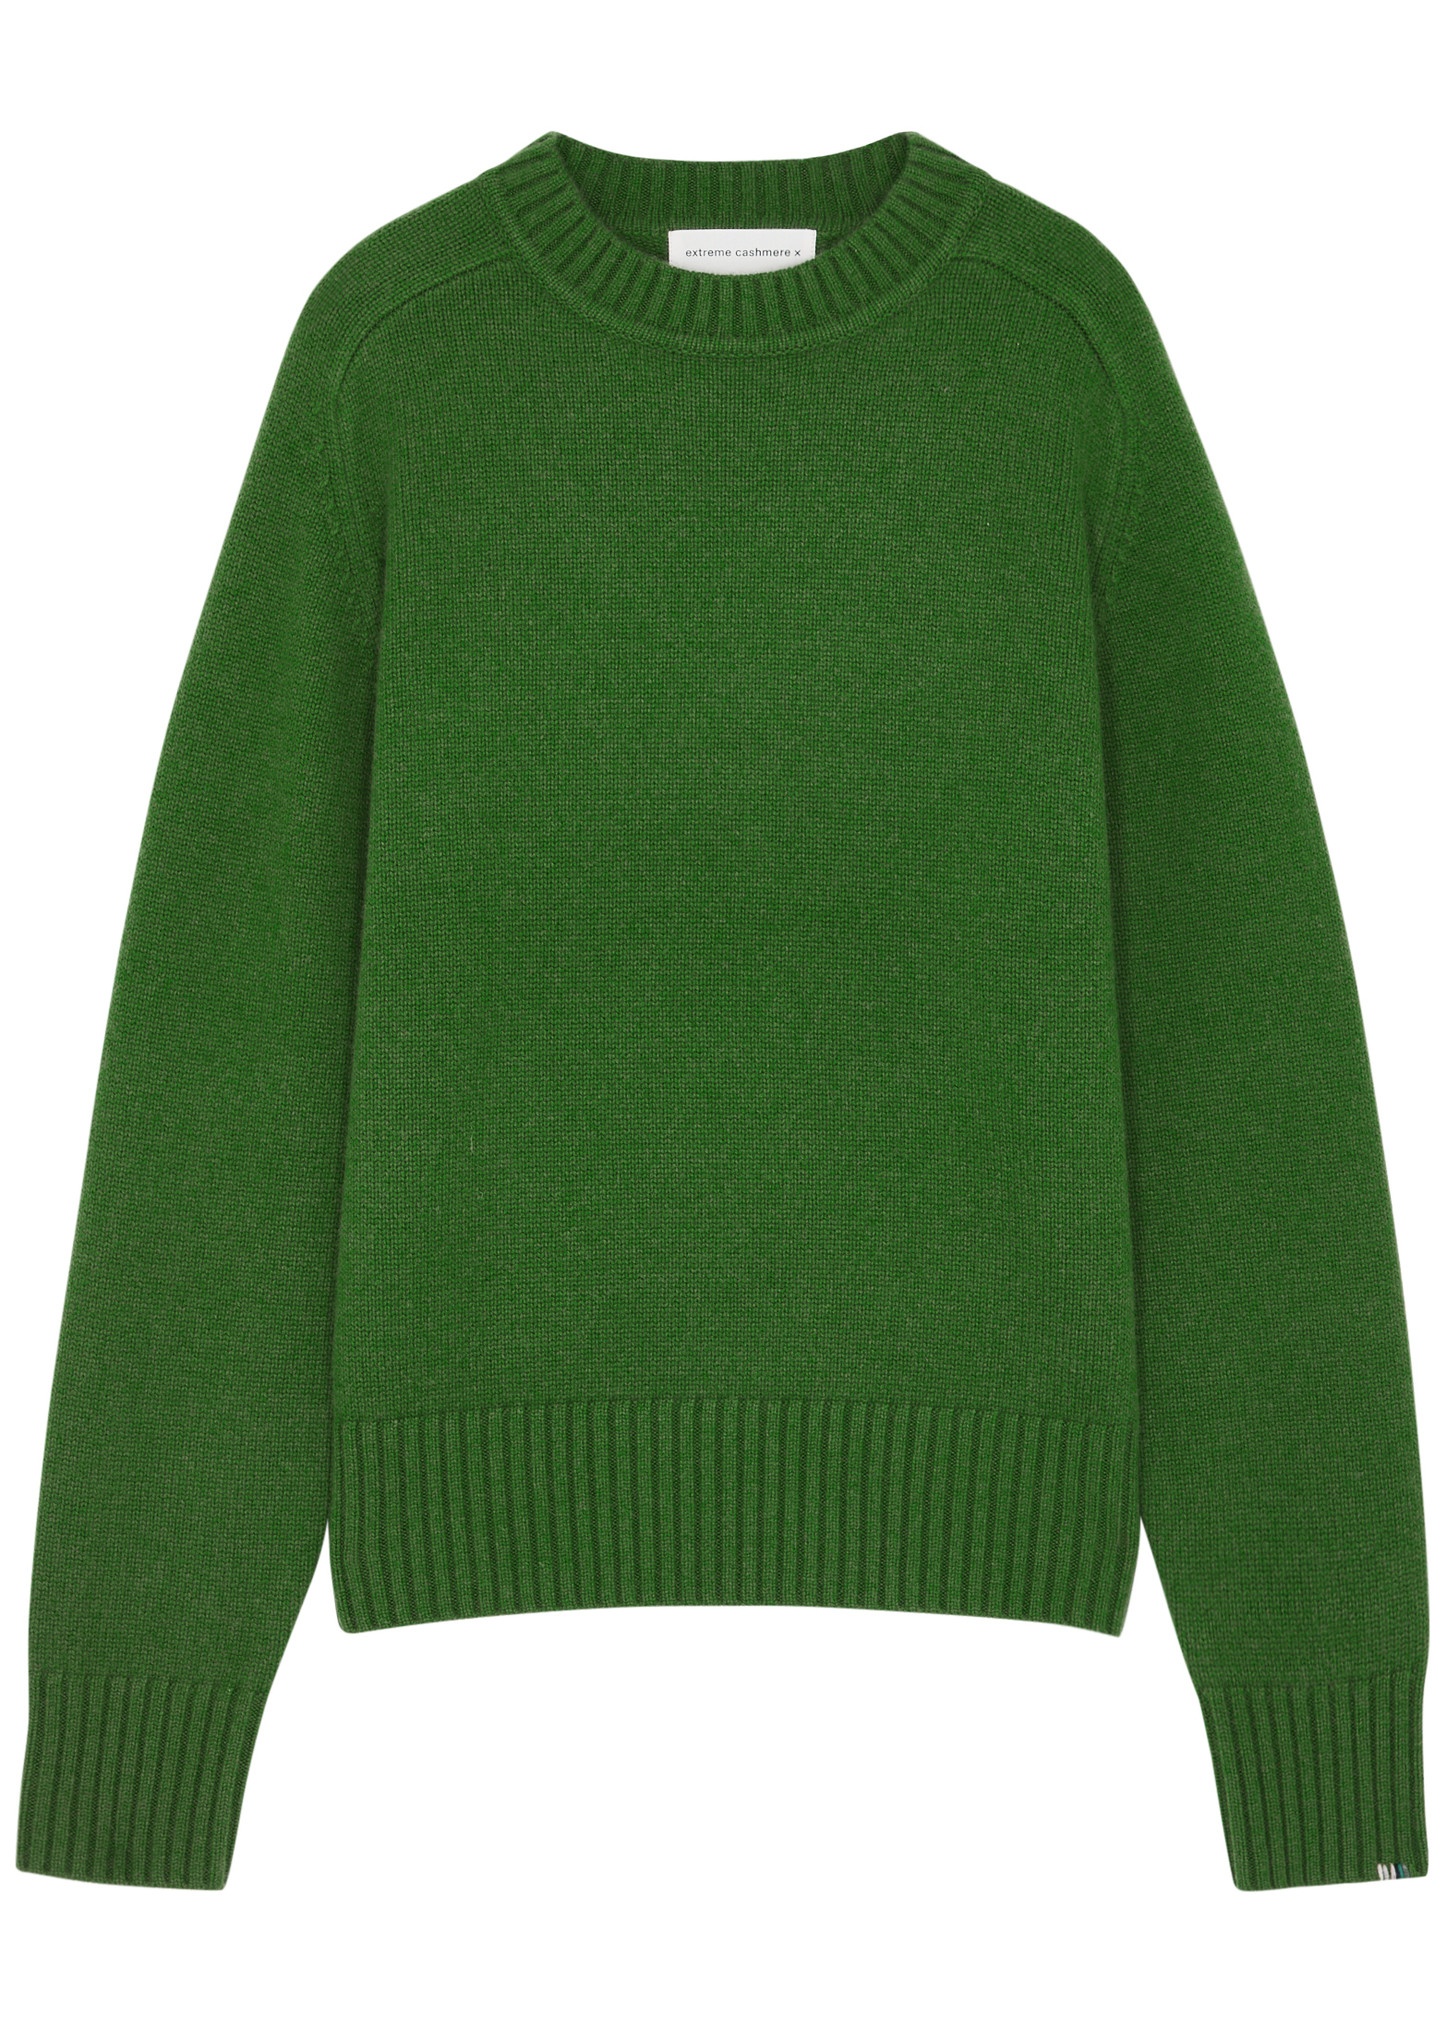 N°123 Bourgeois cashmere jumper - 1